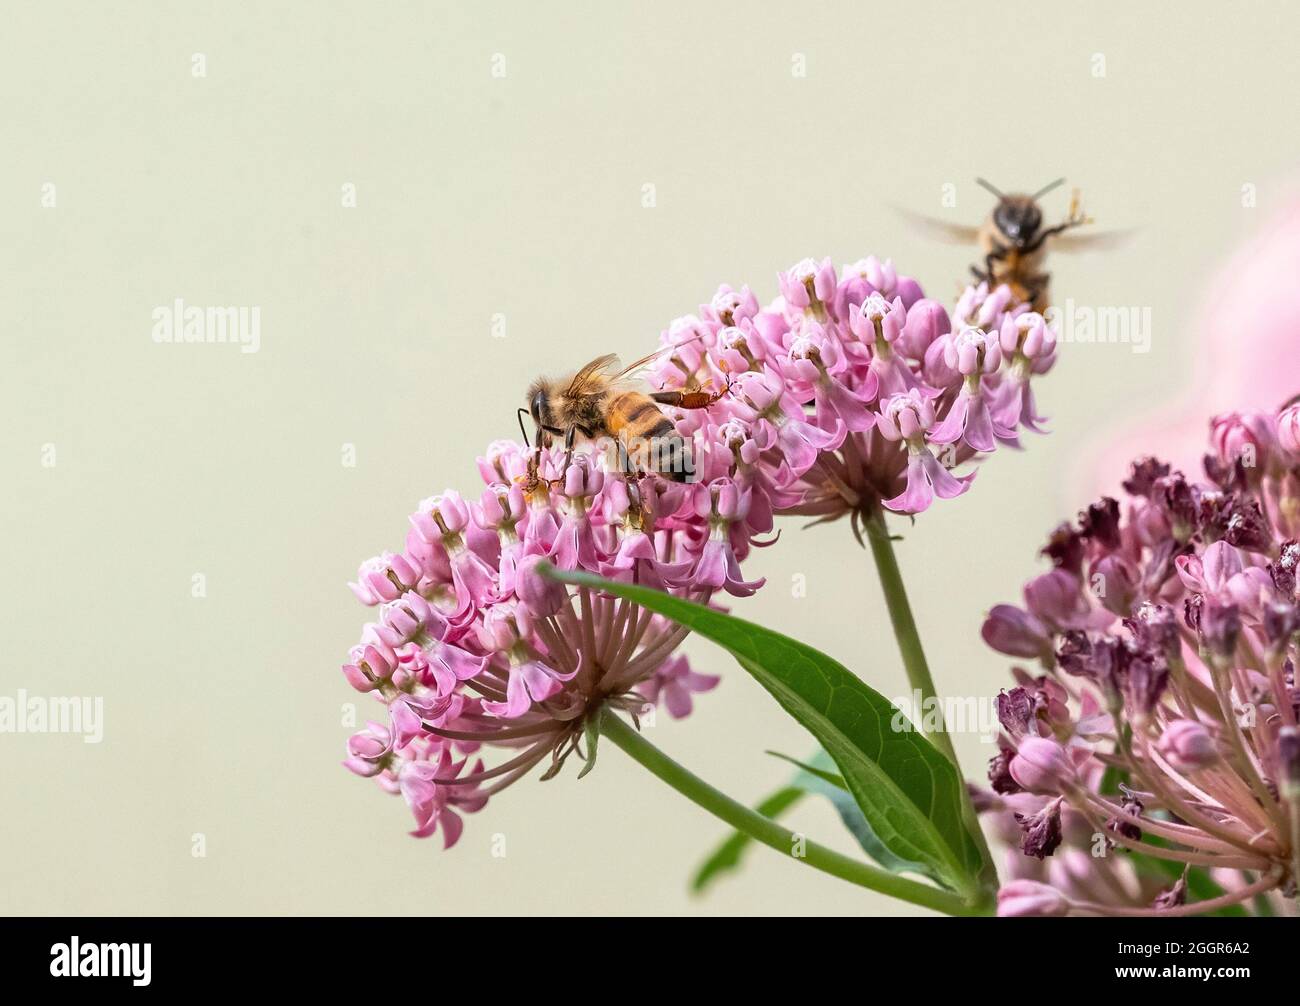 Closeup of a Honey Bee with pollinia, or the sticky pollen granules that can attach to the bee's legs from the Swamp Milkweed flower. Stock Photo